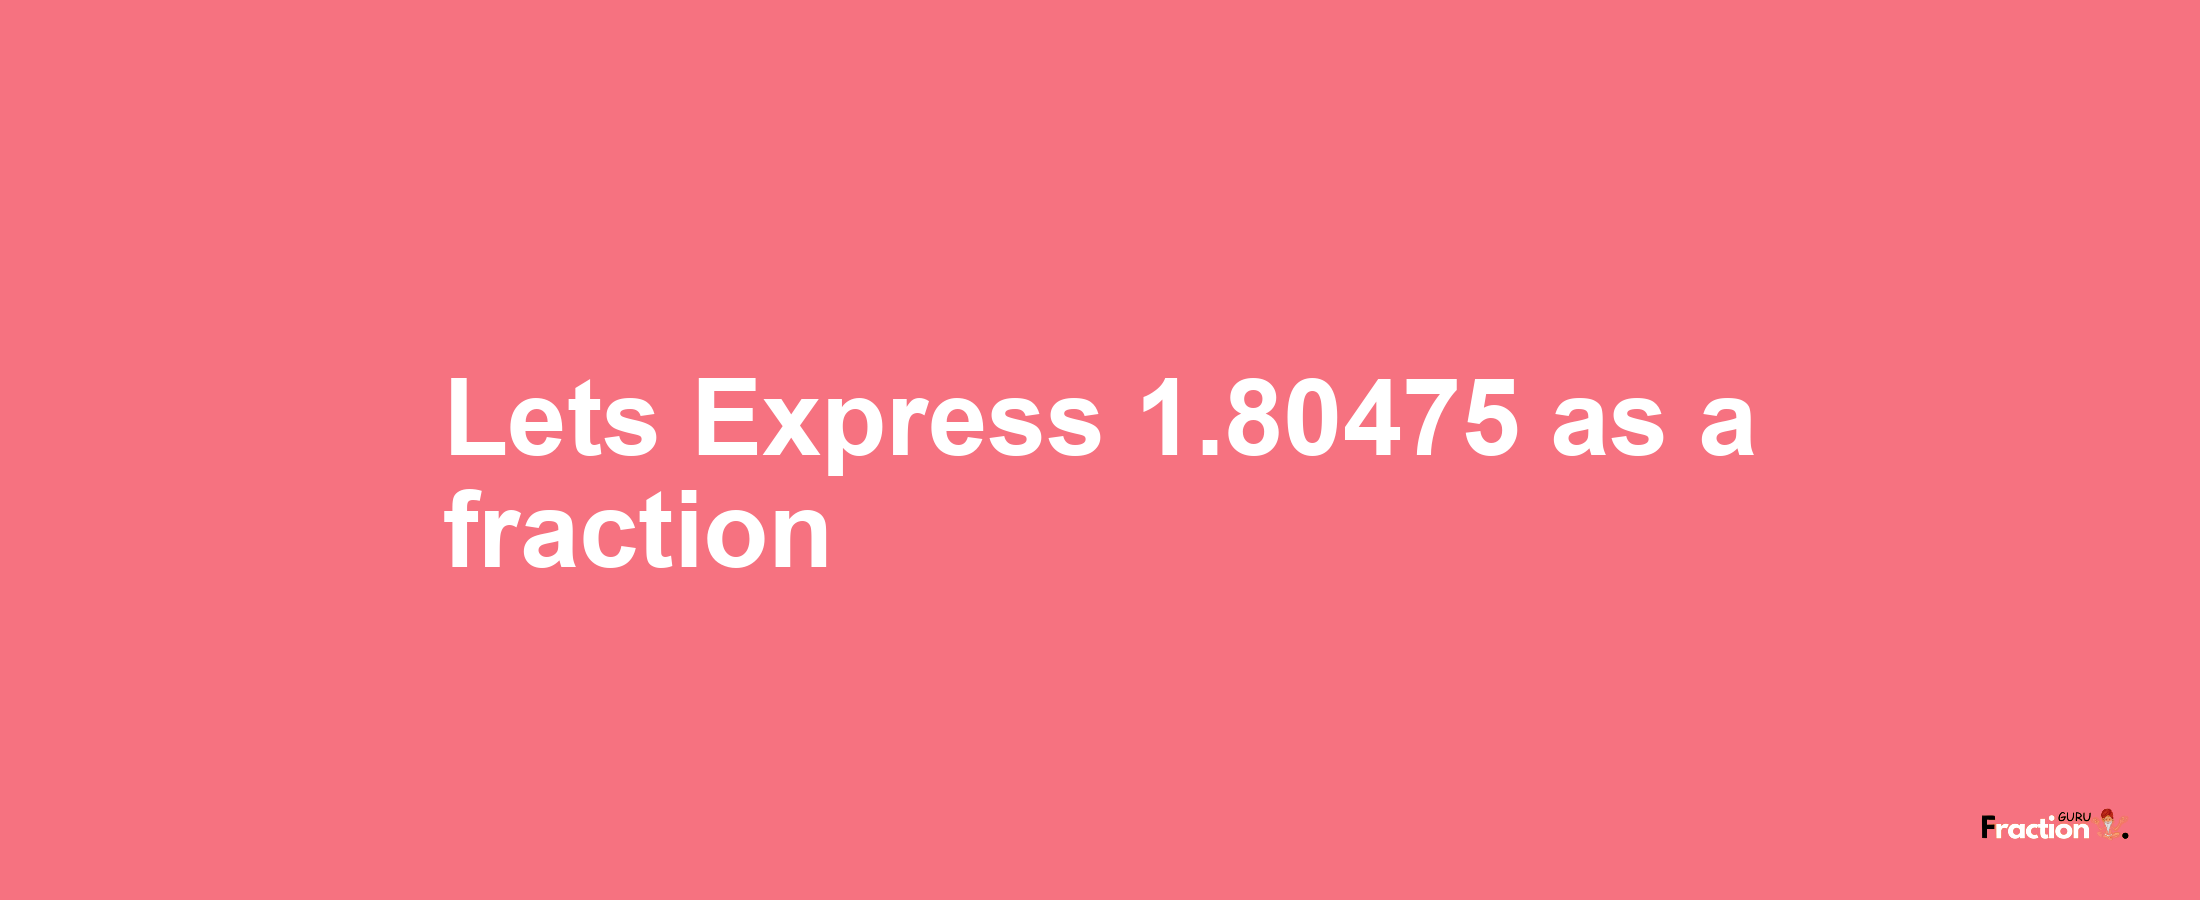 Lets Express 1.80475 as afraction